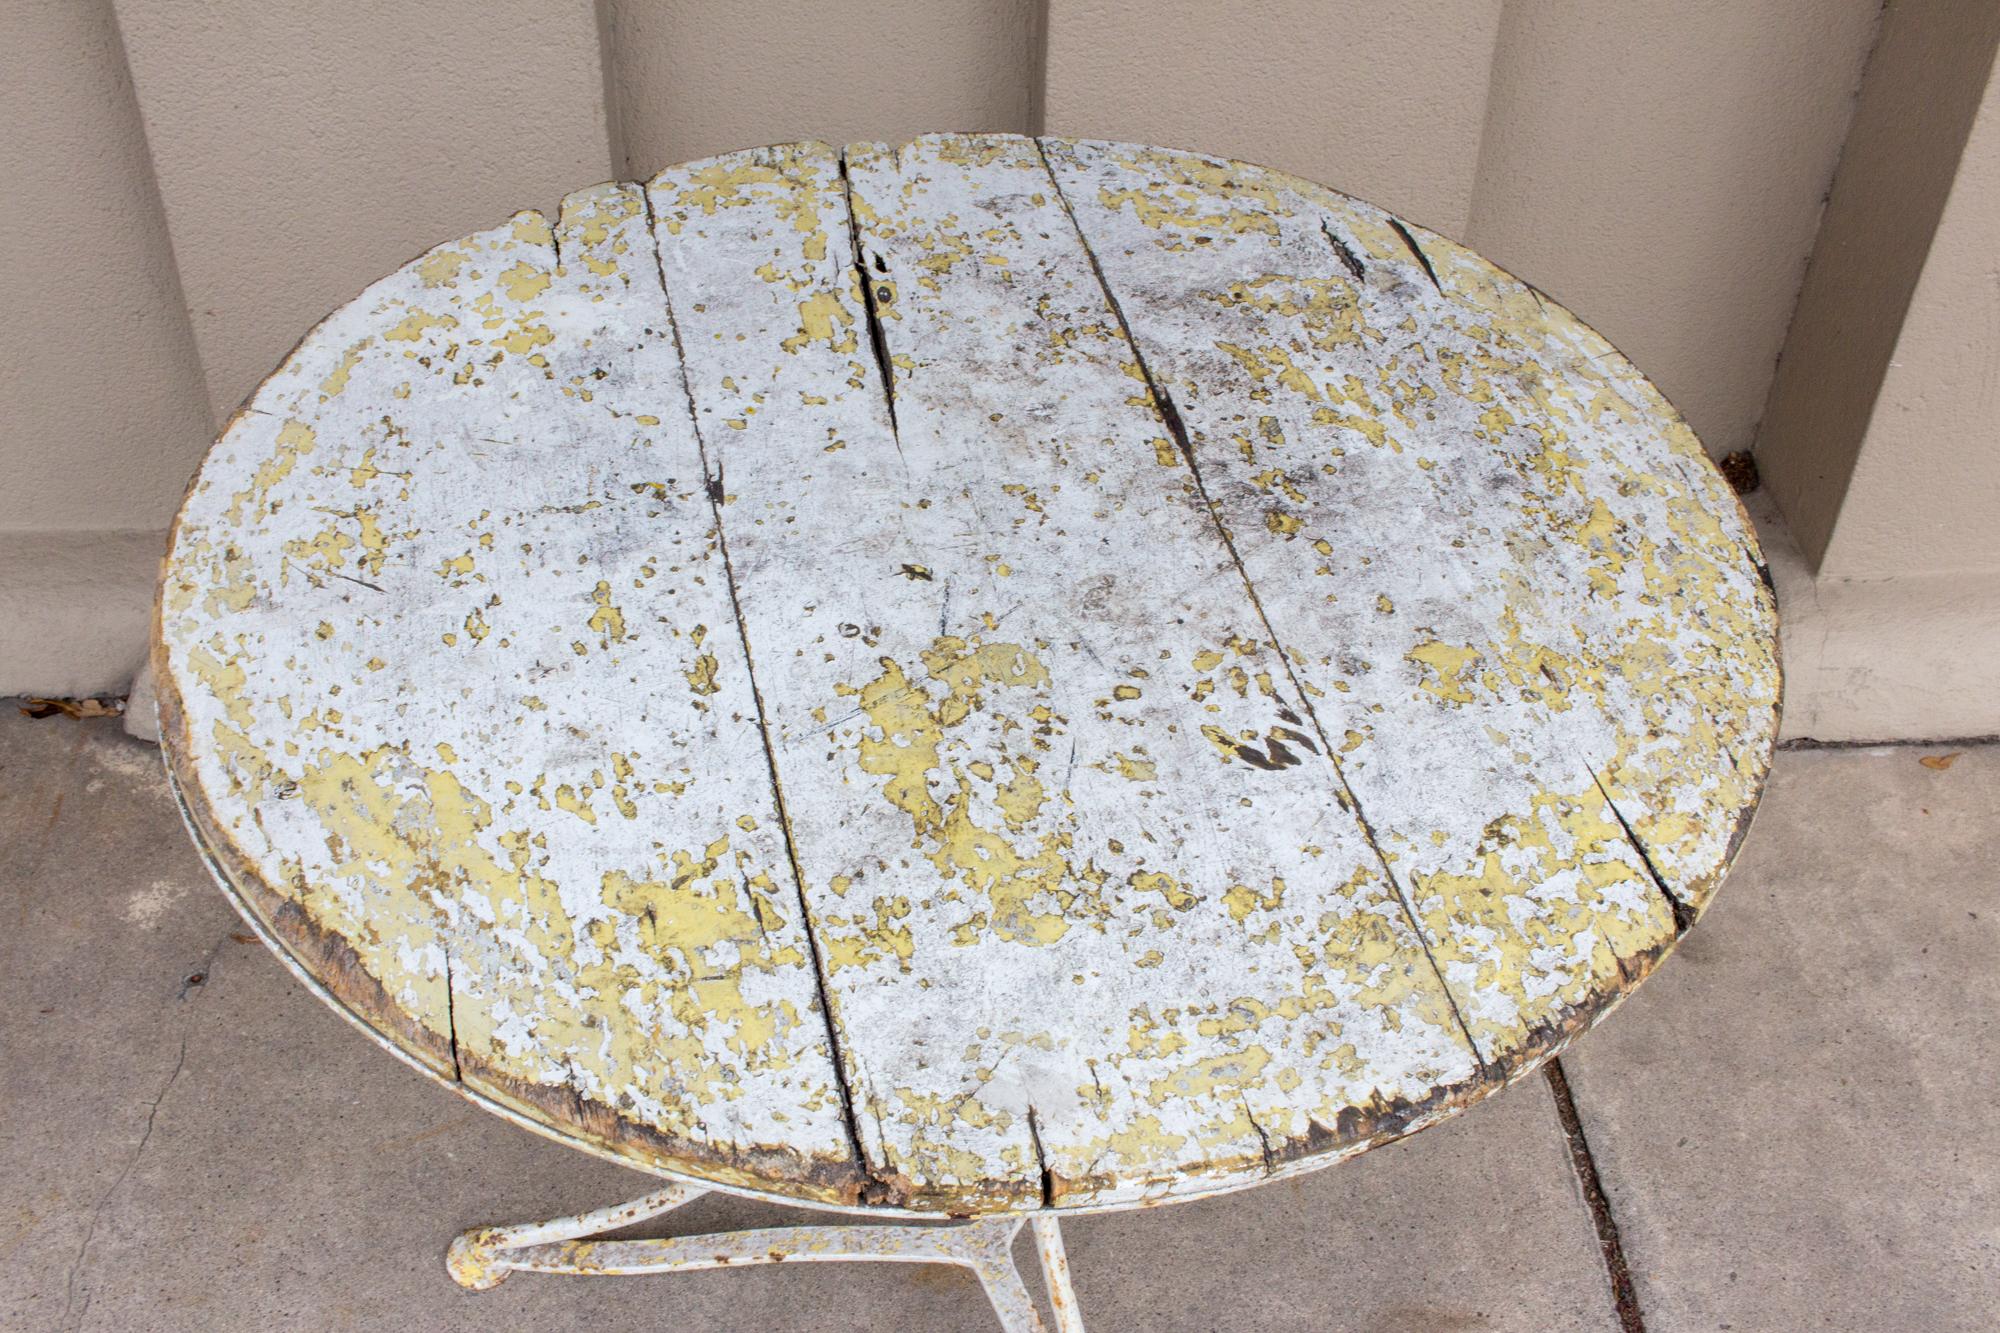 The distressed painted finish on this wonderful iron and wood bistro table is simply fantastic. Uncovered in France, this table has miles of character. The curved legs and generous top make this a perfect place to perch cocktail glasses or a